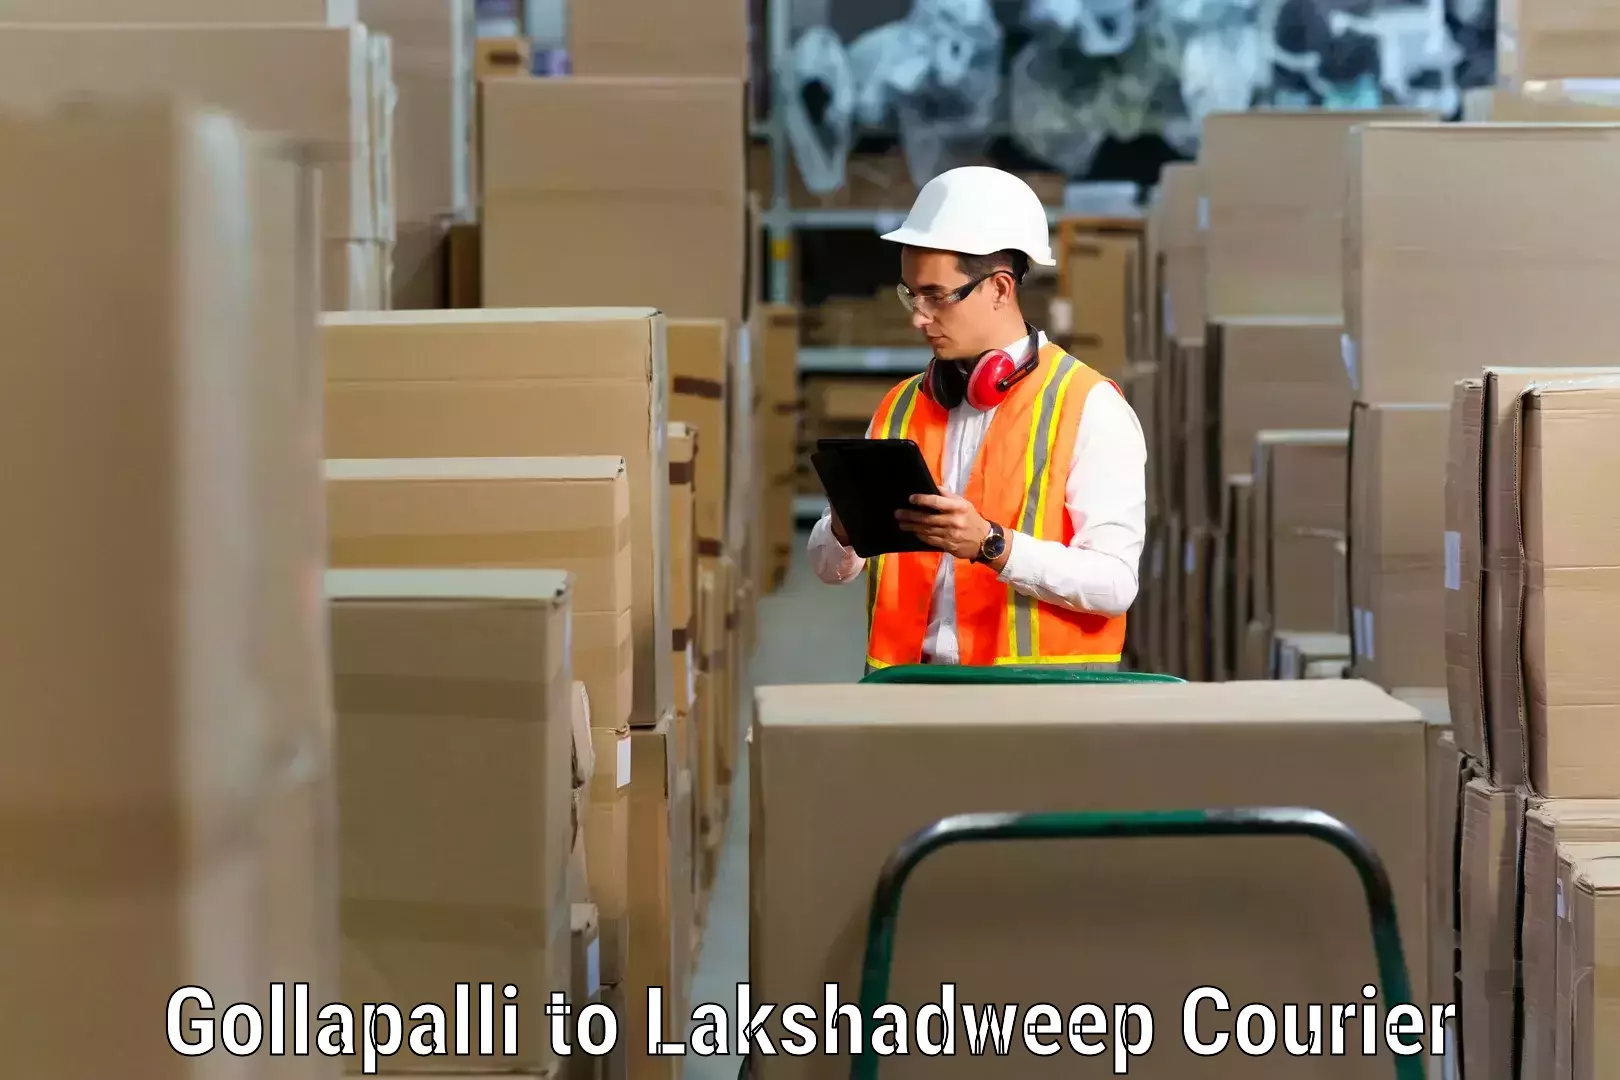 Furniture relocation experts Gollapalli to Lakshadweep